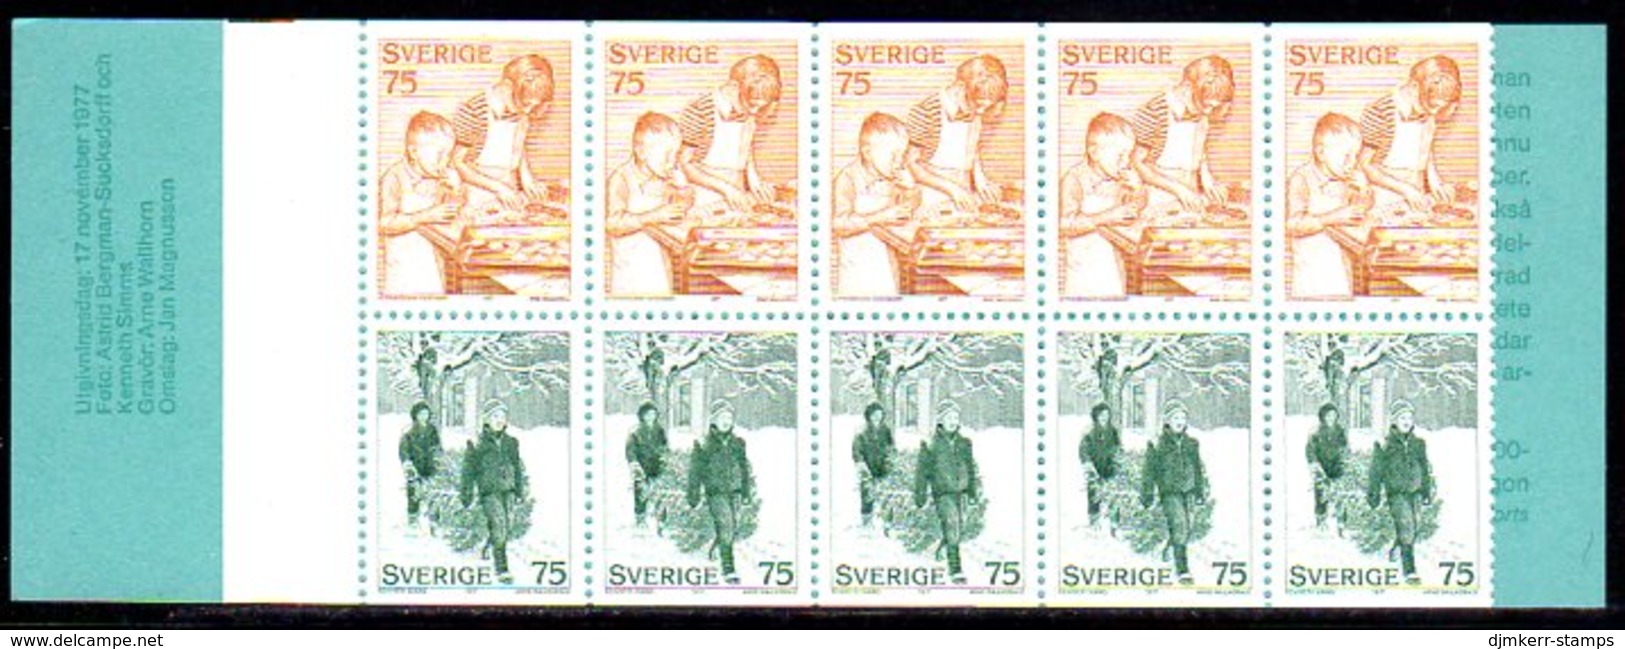 SWEDEN 1977 Christmas Booklets MNH / **. Michel MH64-65 - 1951-80